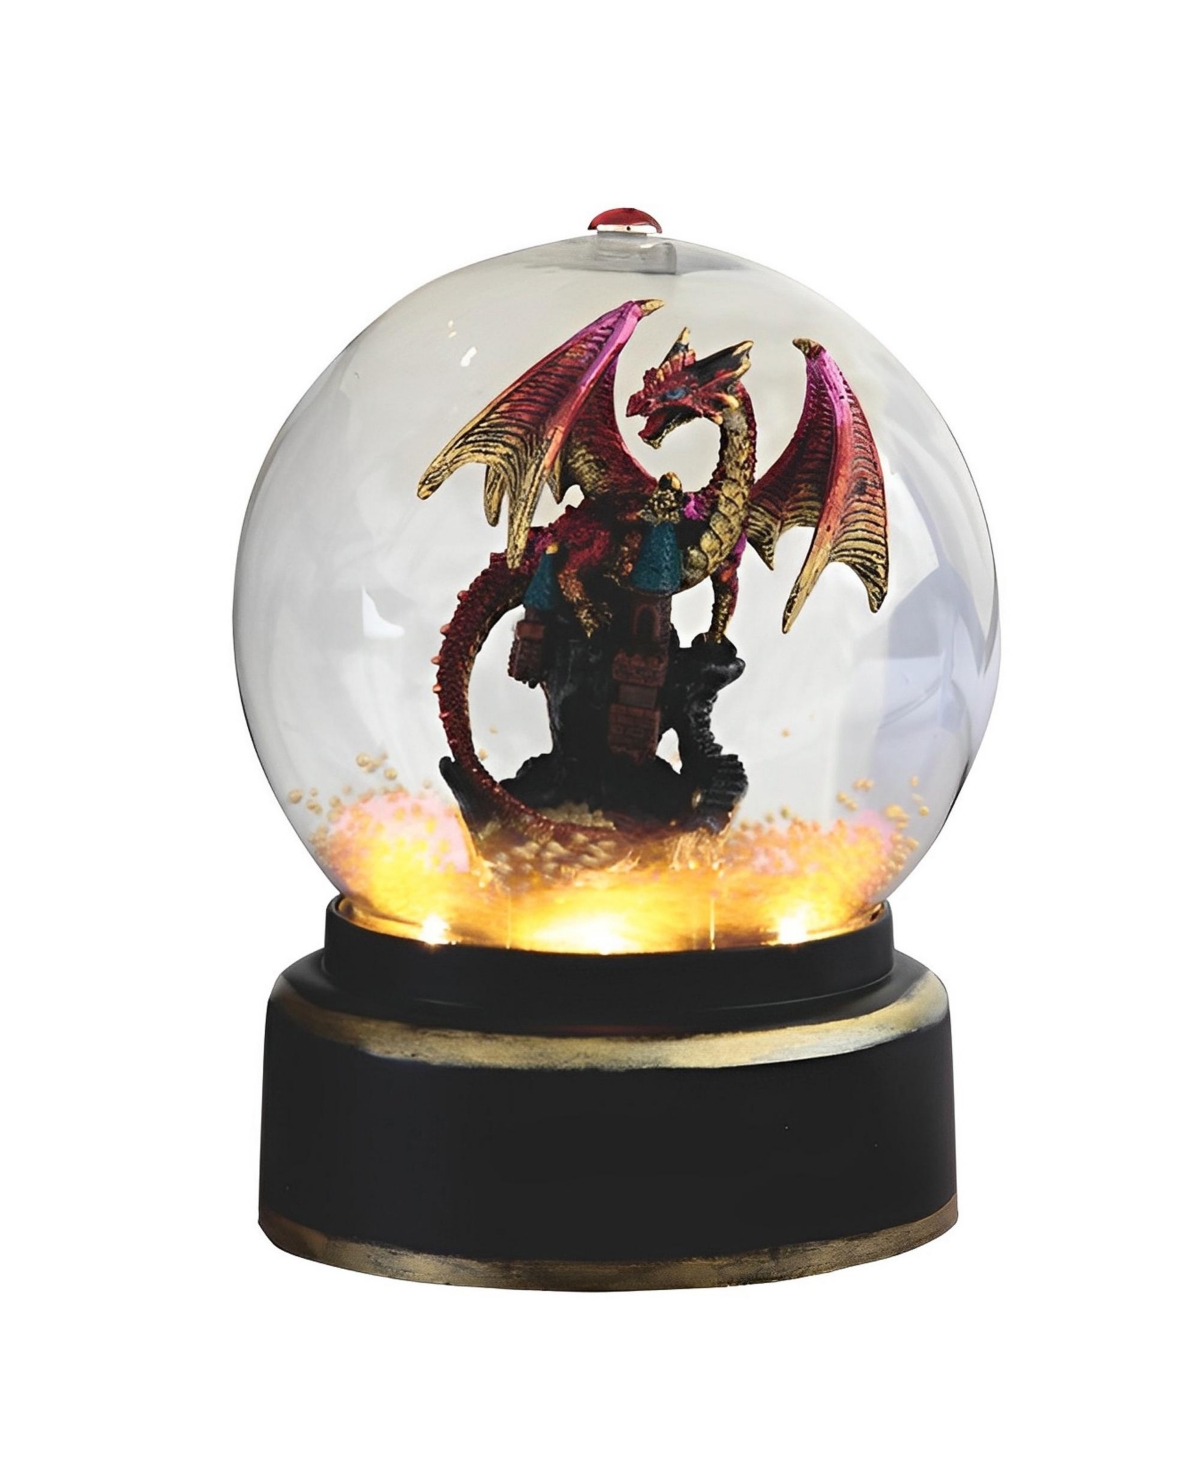 7.5"H Red Dragon in Air Powered Snow Globe Home Decor Perfect Gift for House Warming, Holidays and Birthdays - Multicolor